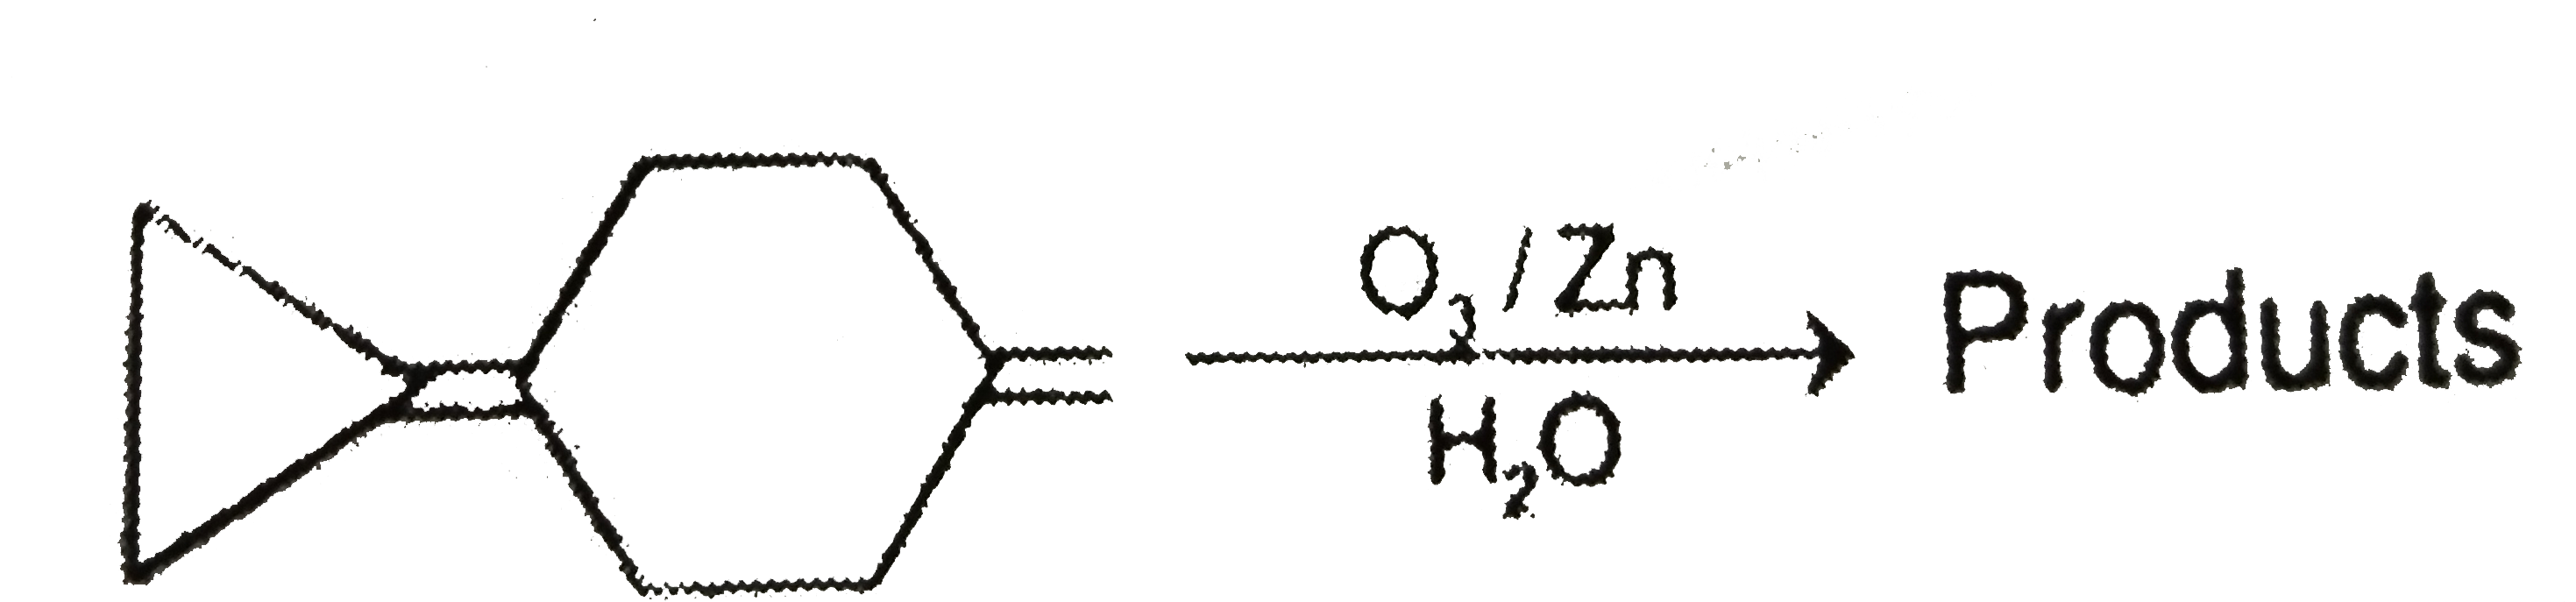 Aldehyde and ketones may be prepared by reductive cleavage of carbon-carbon double bonds. A particularly useful reagent for this purpose is ozone under reductive condition in the formation of carbonyl  compounds.     products   Which of the following products is not formed in above reaction.